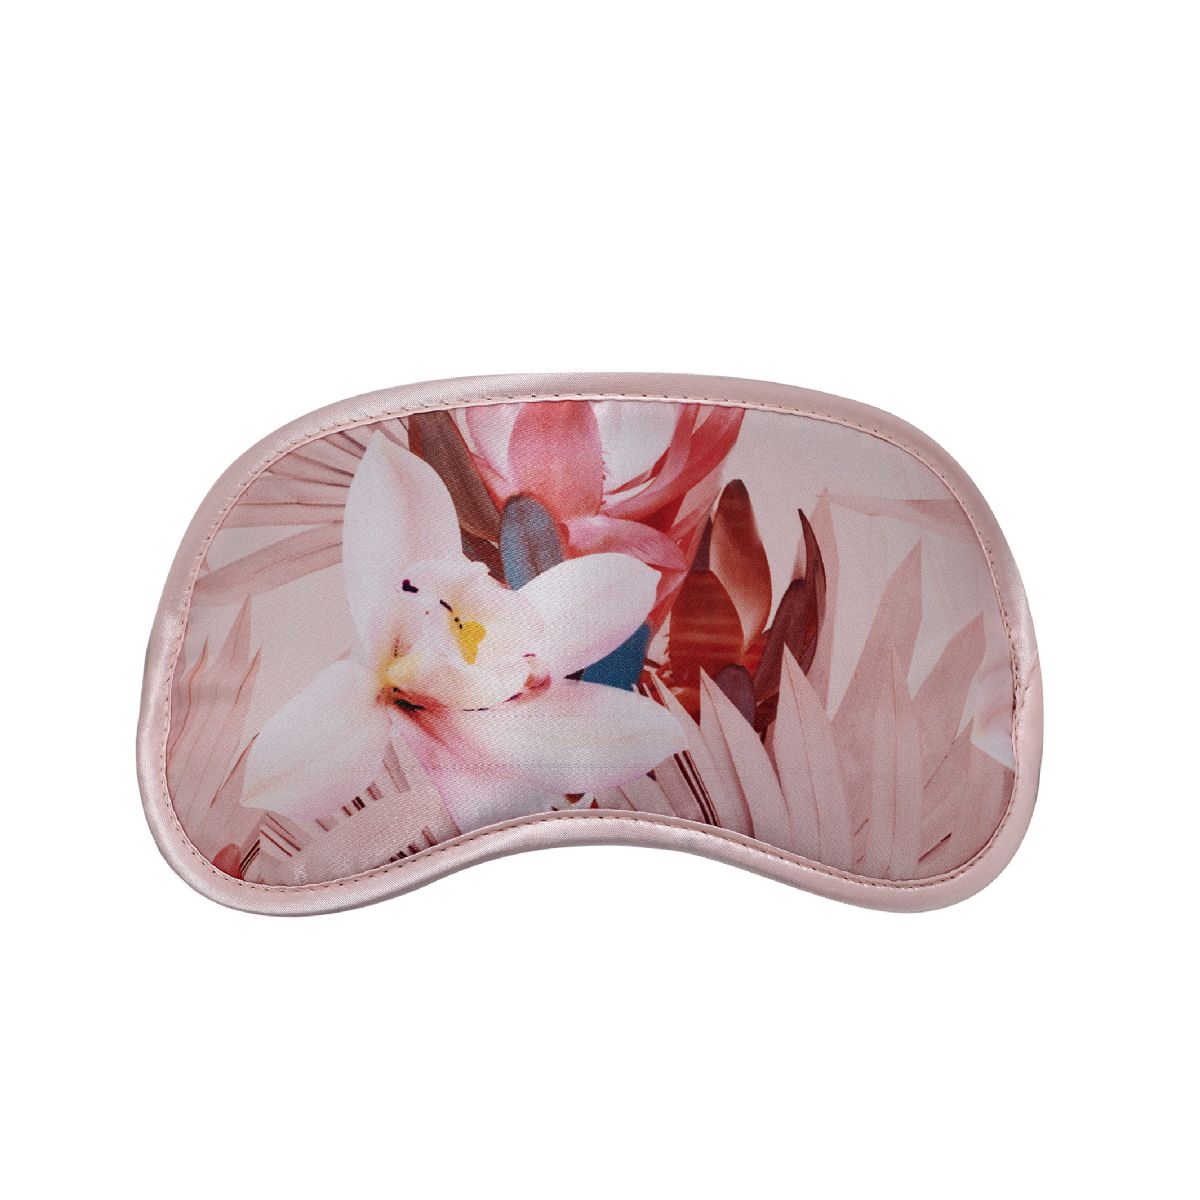 Exotic Bouquet Eye Mask and Ear Plugs